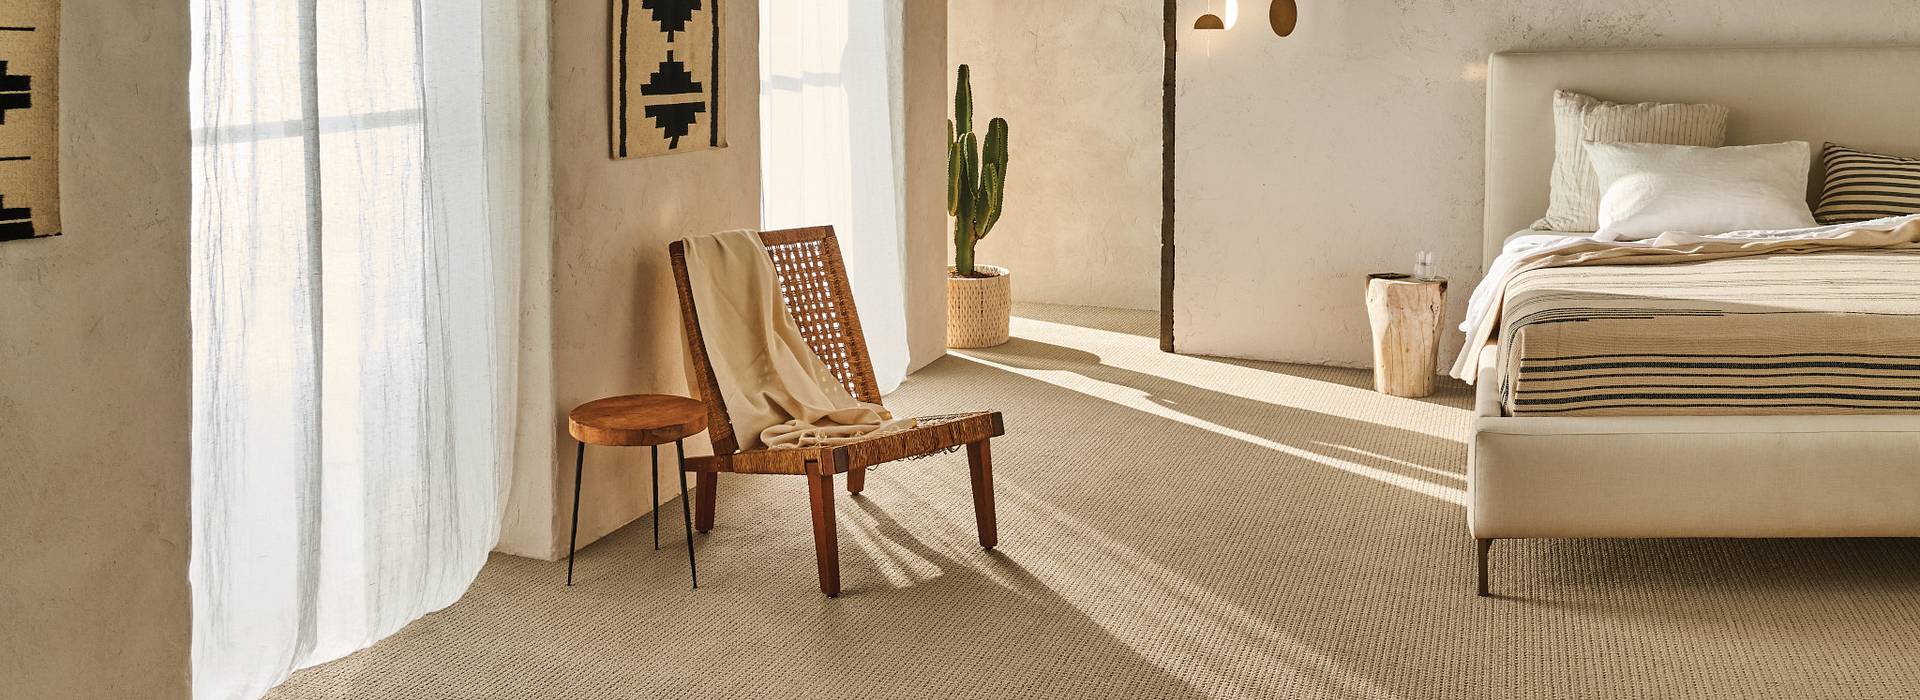 Taking its cues from the rhythm and repetition of thoughtfully stacked brick, this small-scale loop has 24 color offerings in all the right neutral shades.